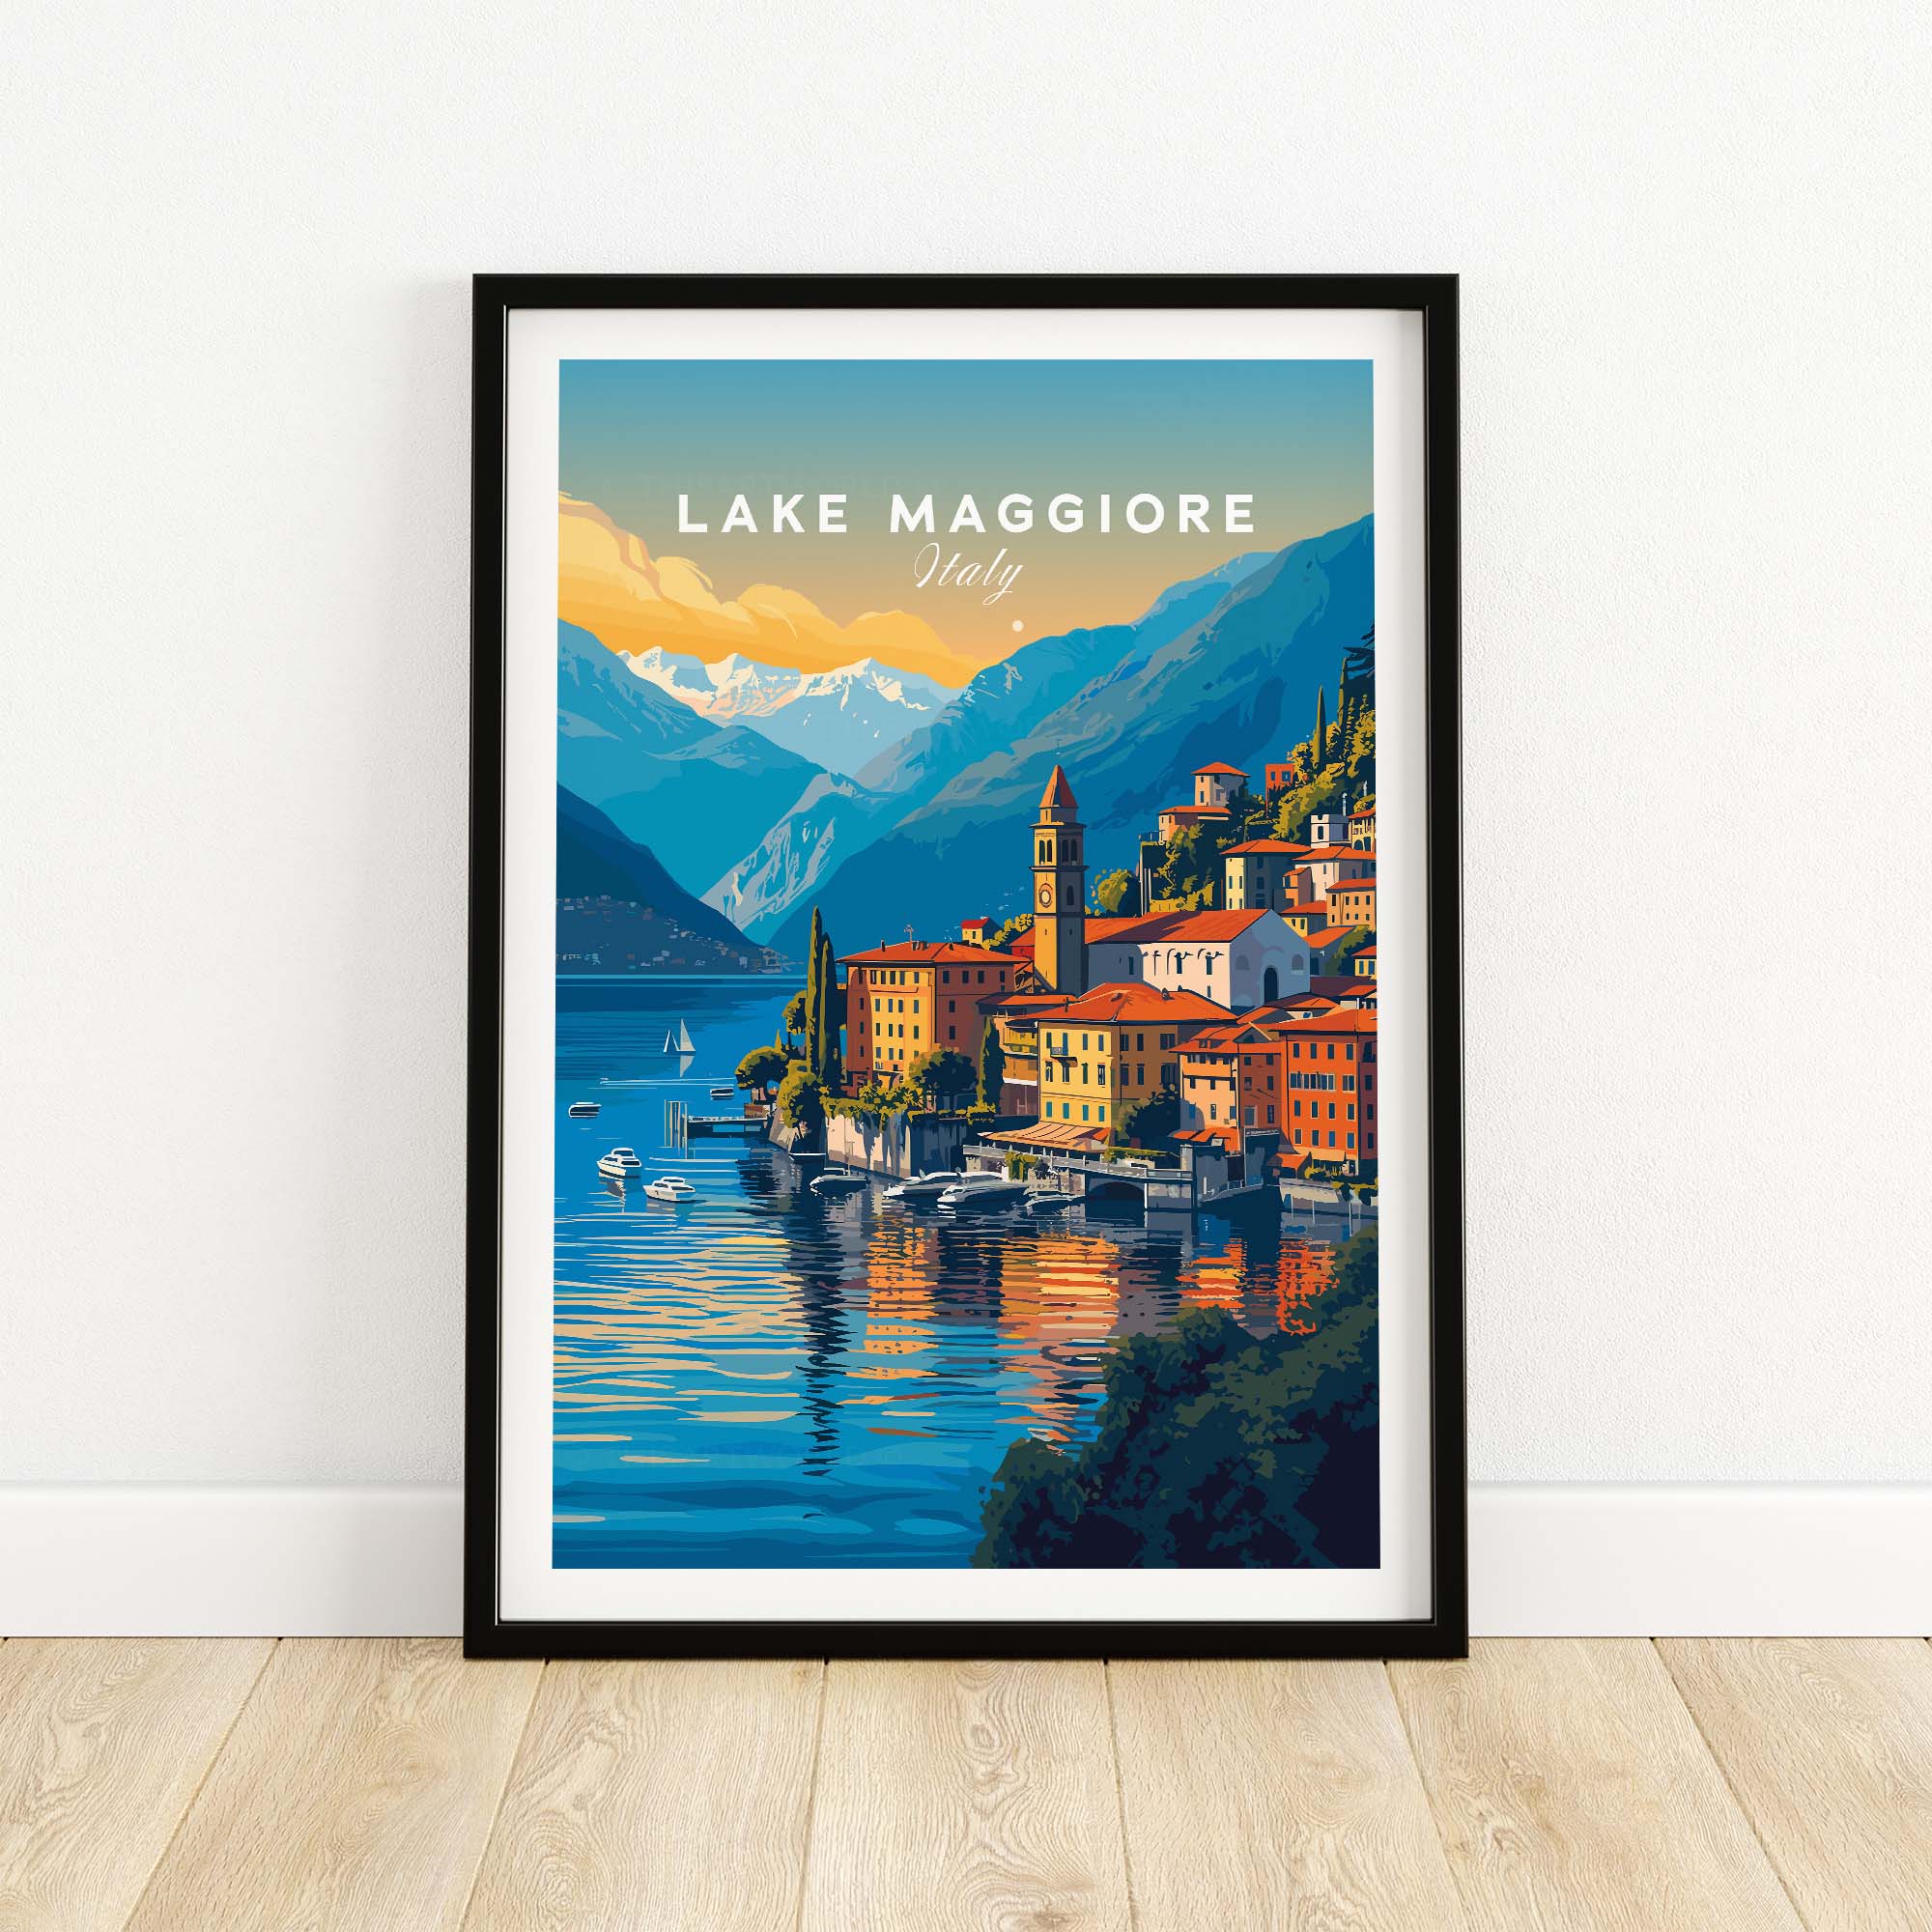 Lake Maggiore Print part of our best collection or travel posters and prints - ThisArtWorld